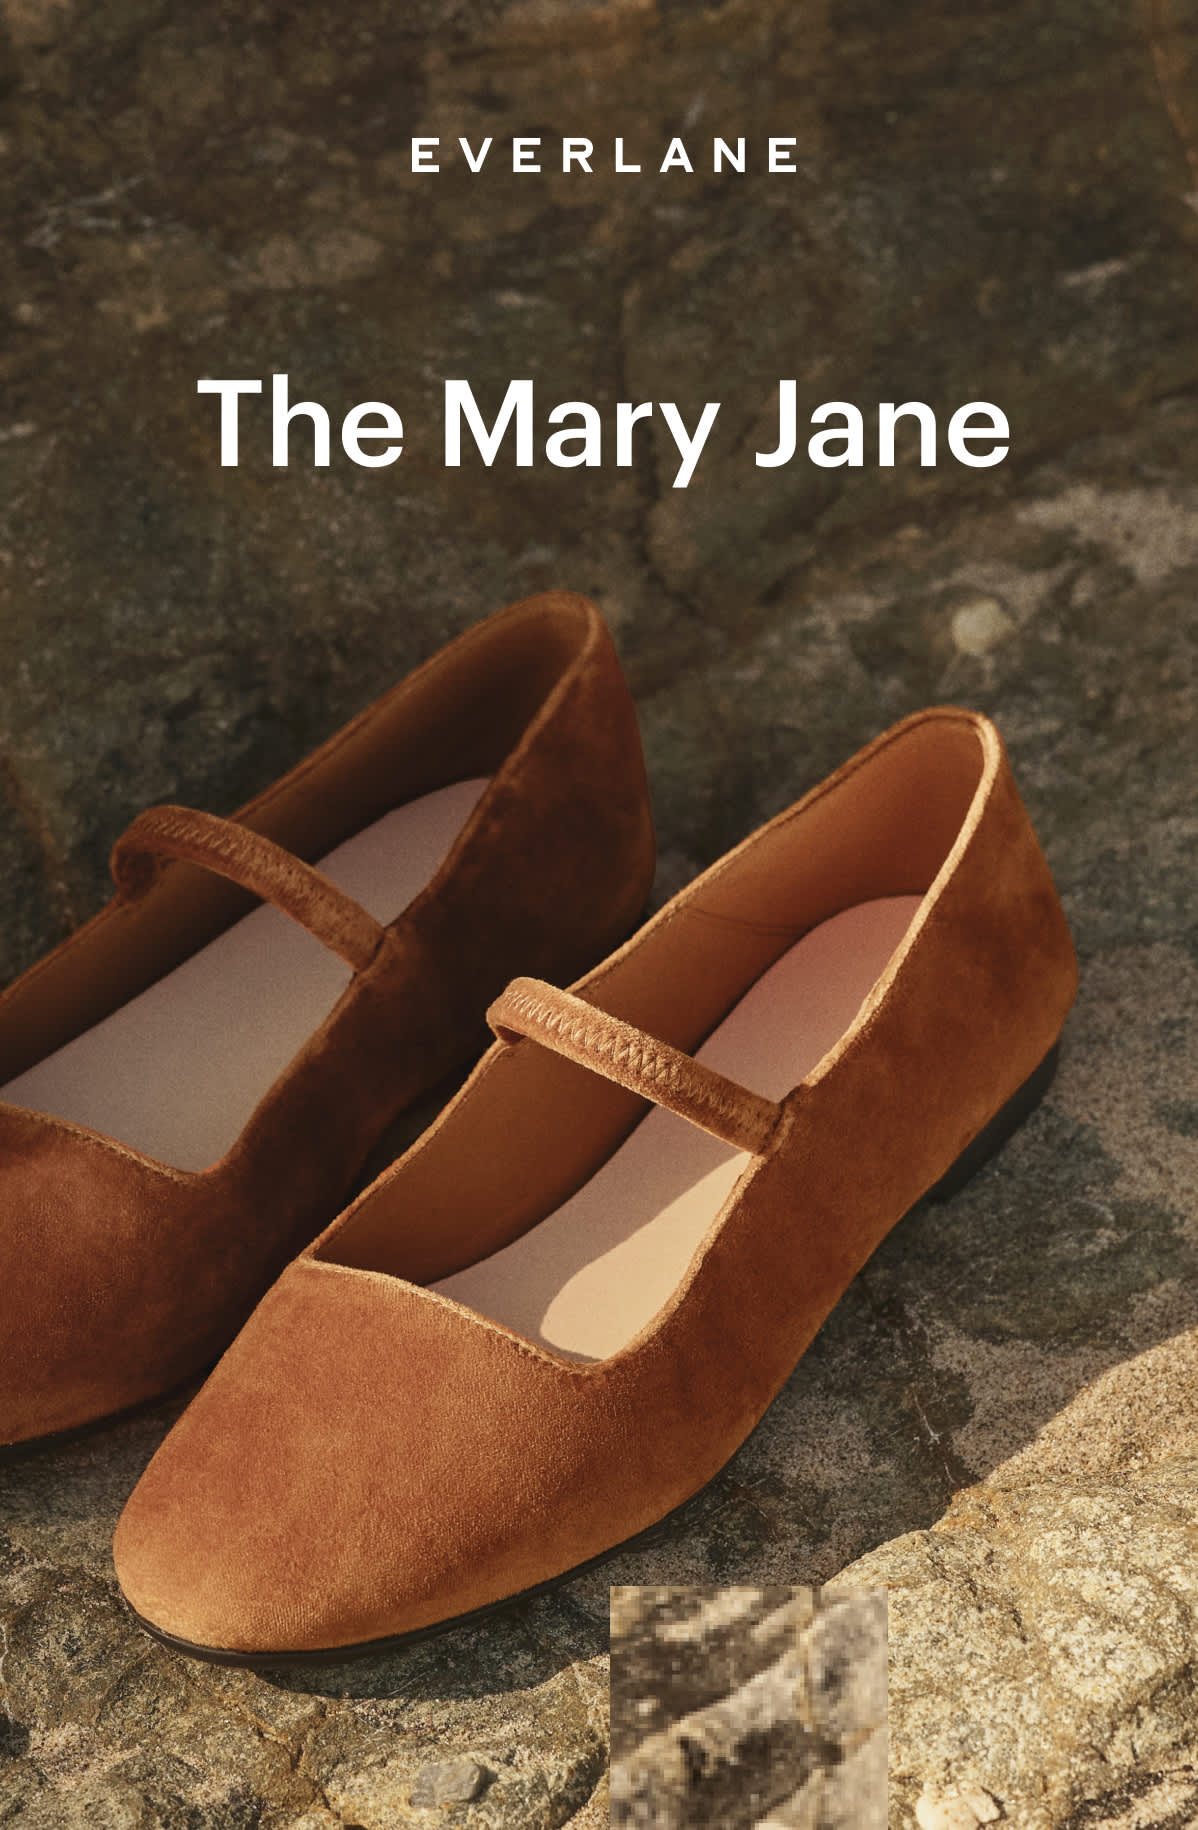 The Mary Jane